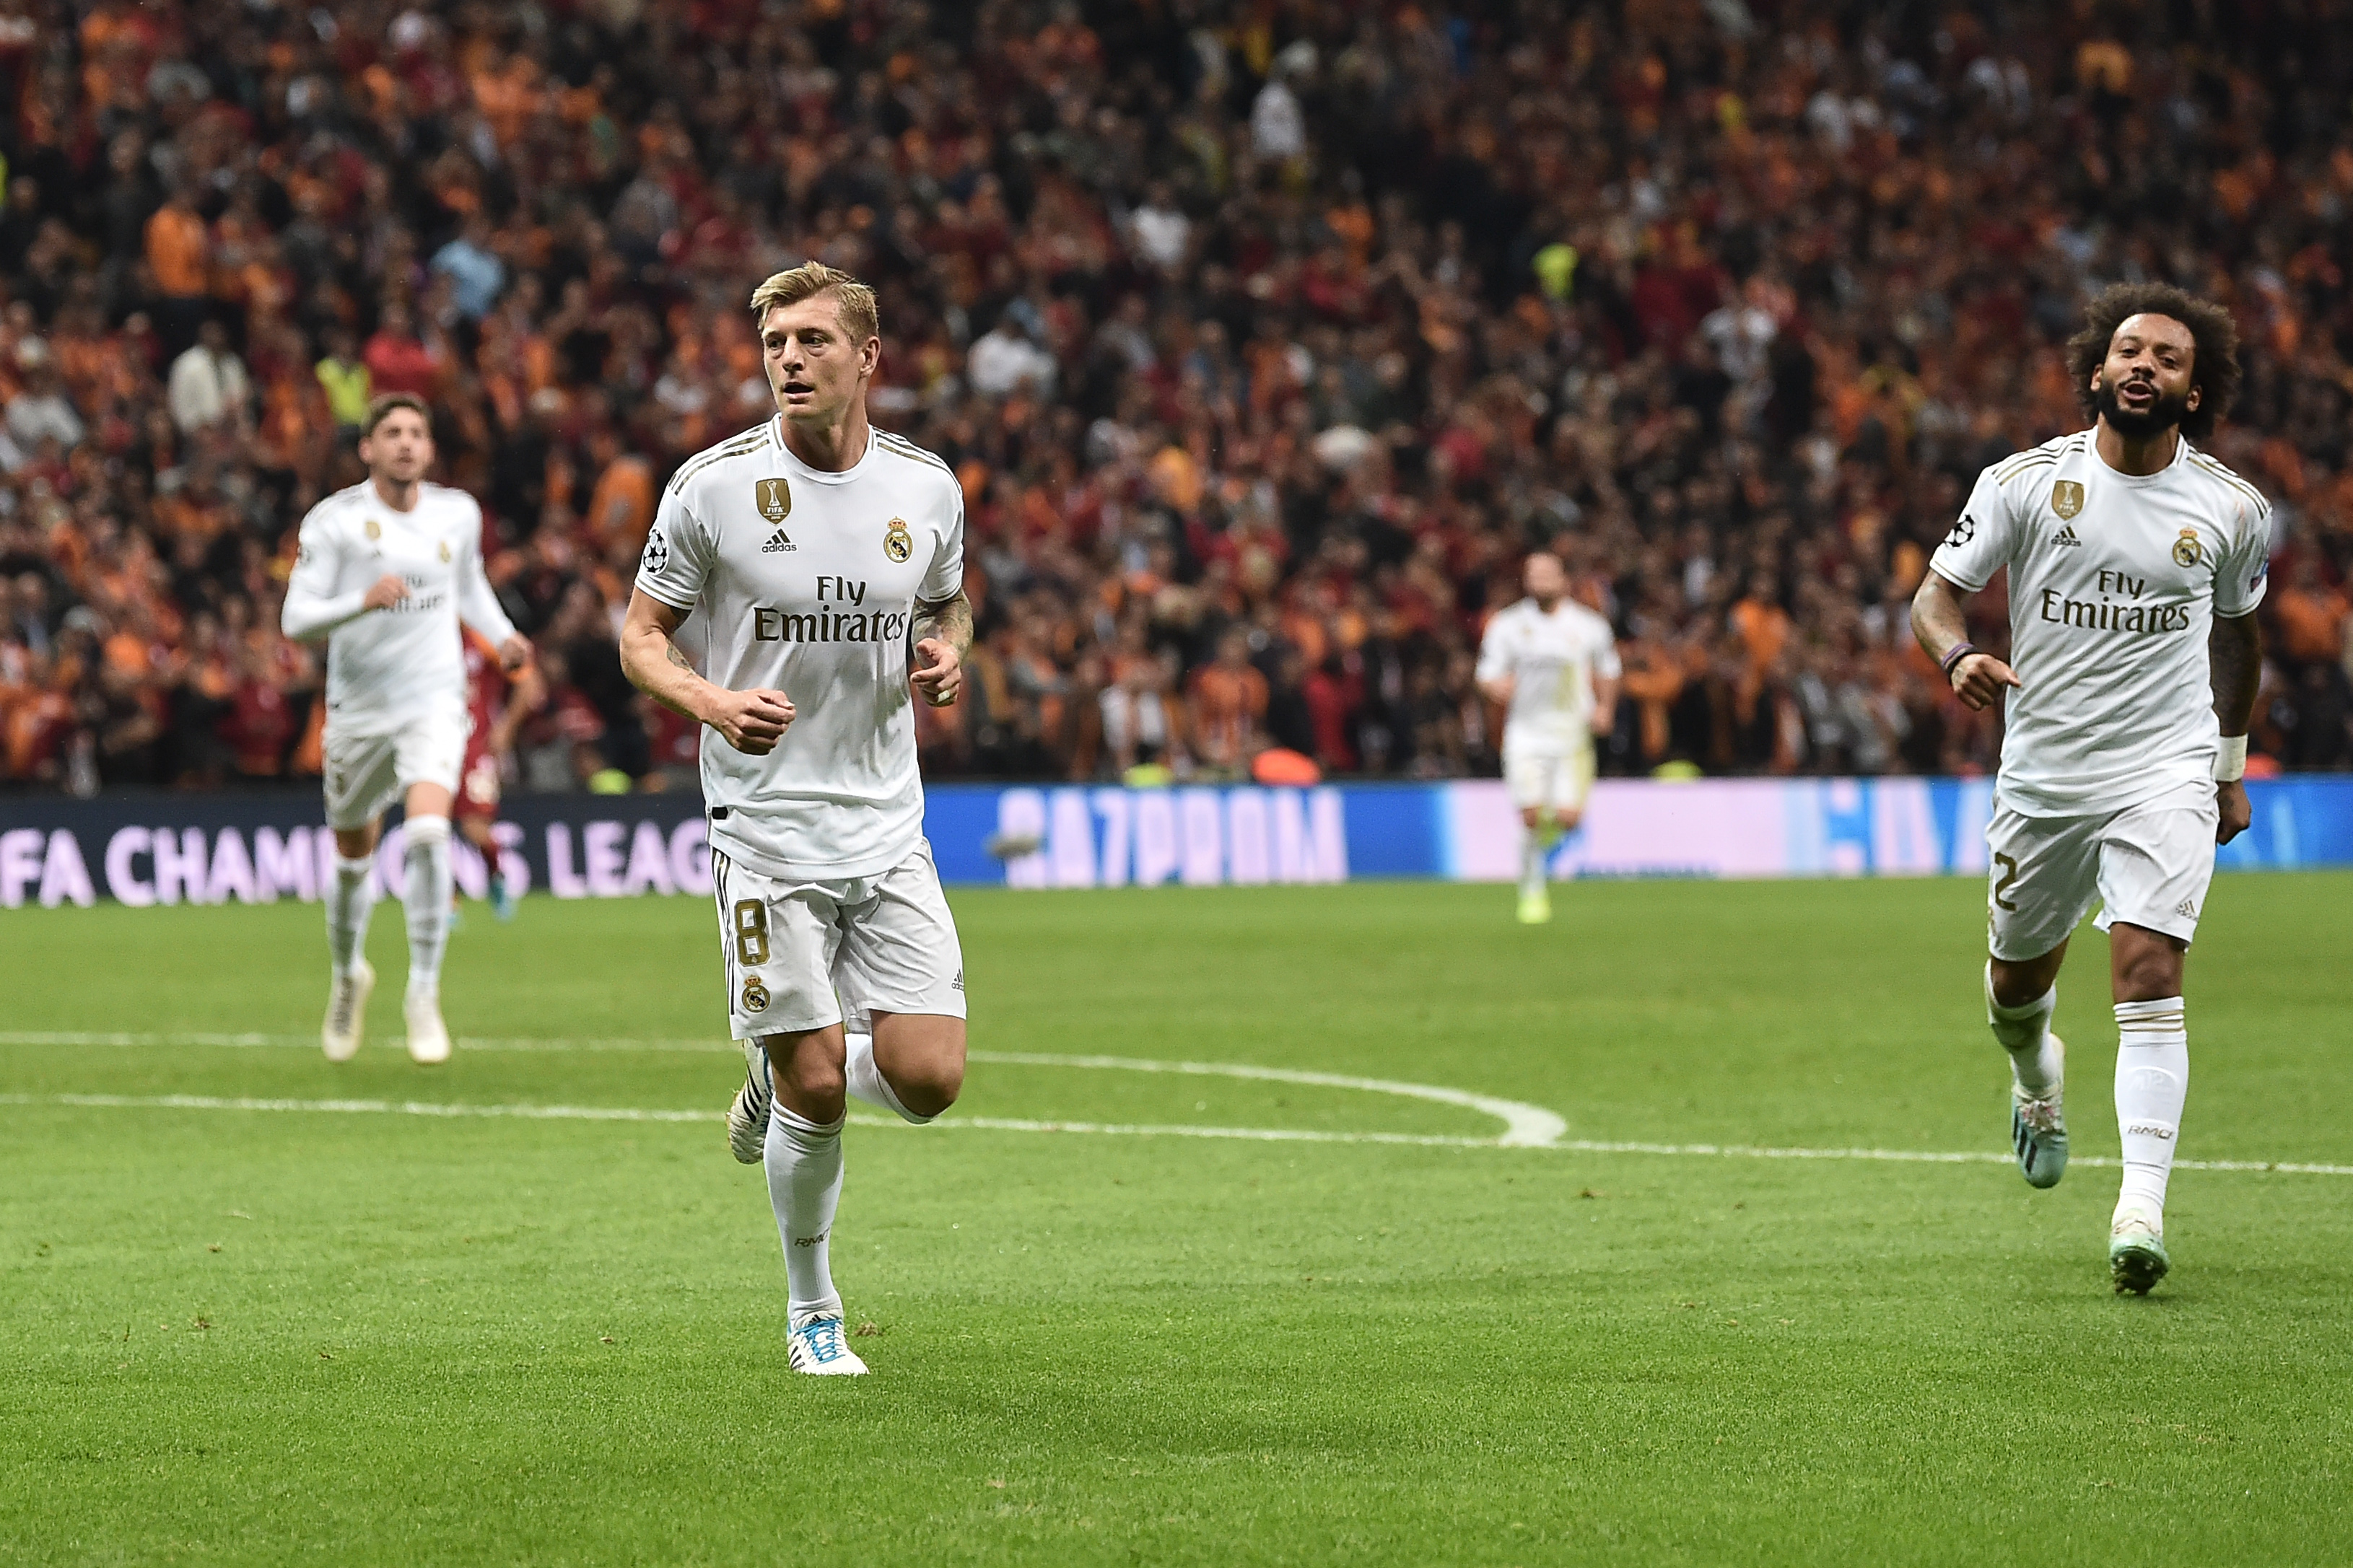 Real Madrid's German midfielder Toni Kroos (L) celebrates with Real Madrid's Brazilian defender Marcelo (R) after he scored a goal during the UEFA Champions League group A football match between Galatasaray and Real Madrid on October 22, 2019 at the Ali Sami Yen Spor Kompleksi in Istanbul. (Photo by OZAN KOSE / AFP) (Photo by OZAN KOSE/AFP via Getty Images)